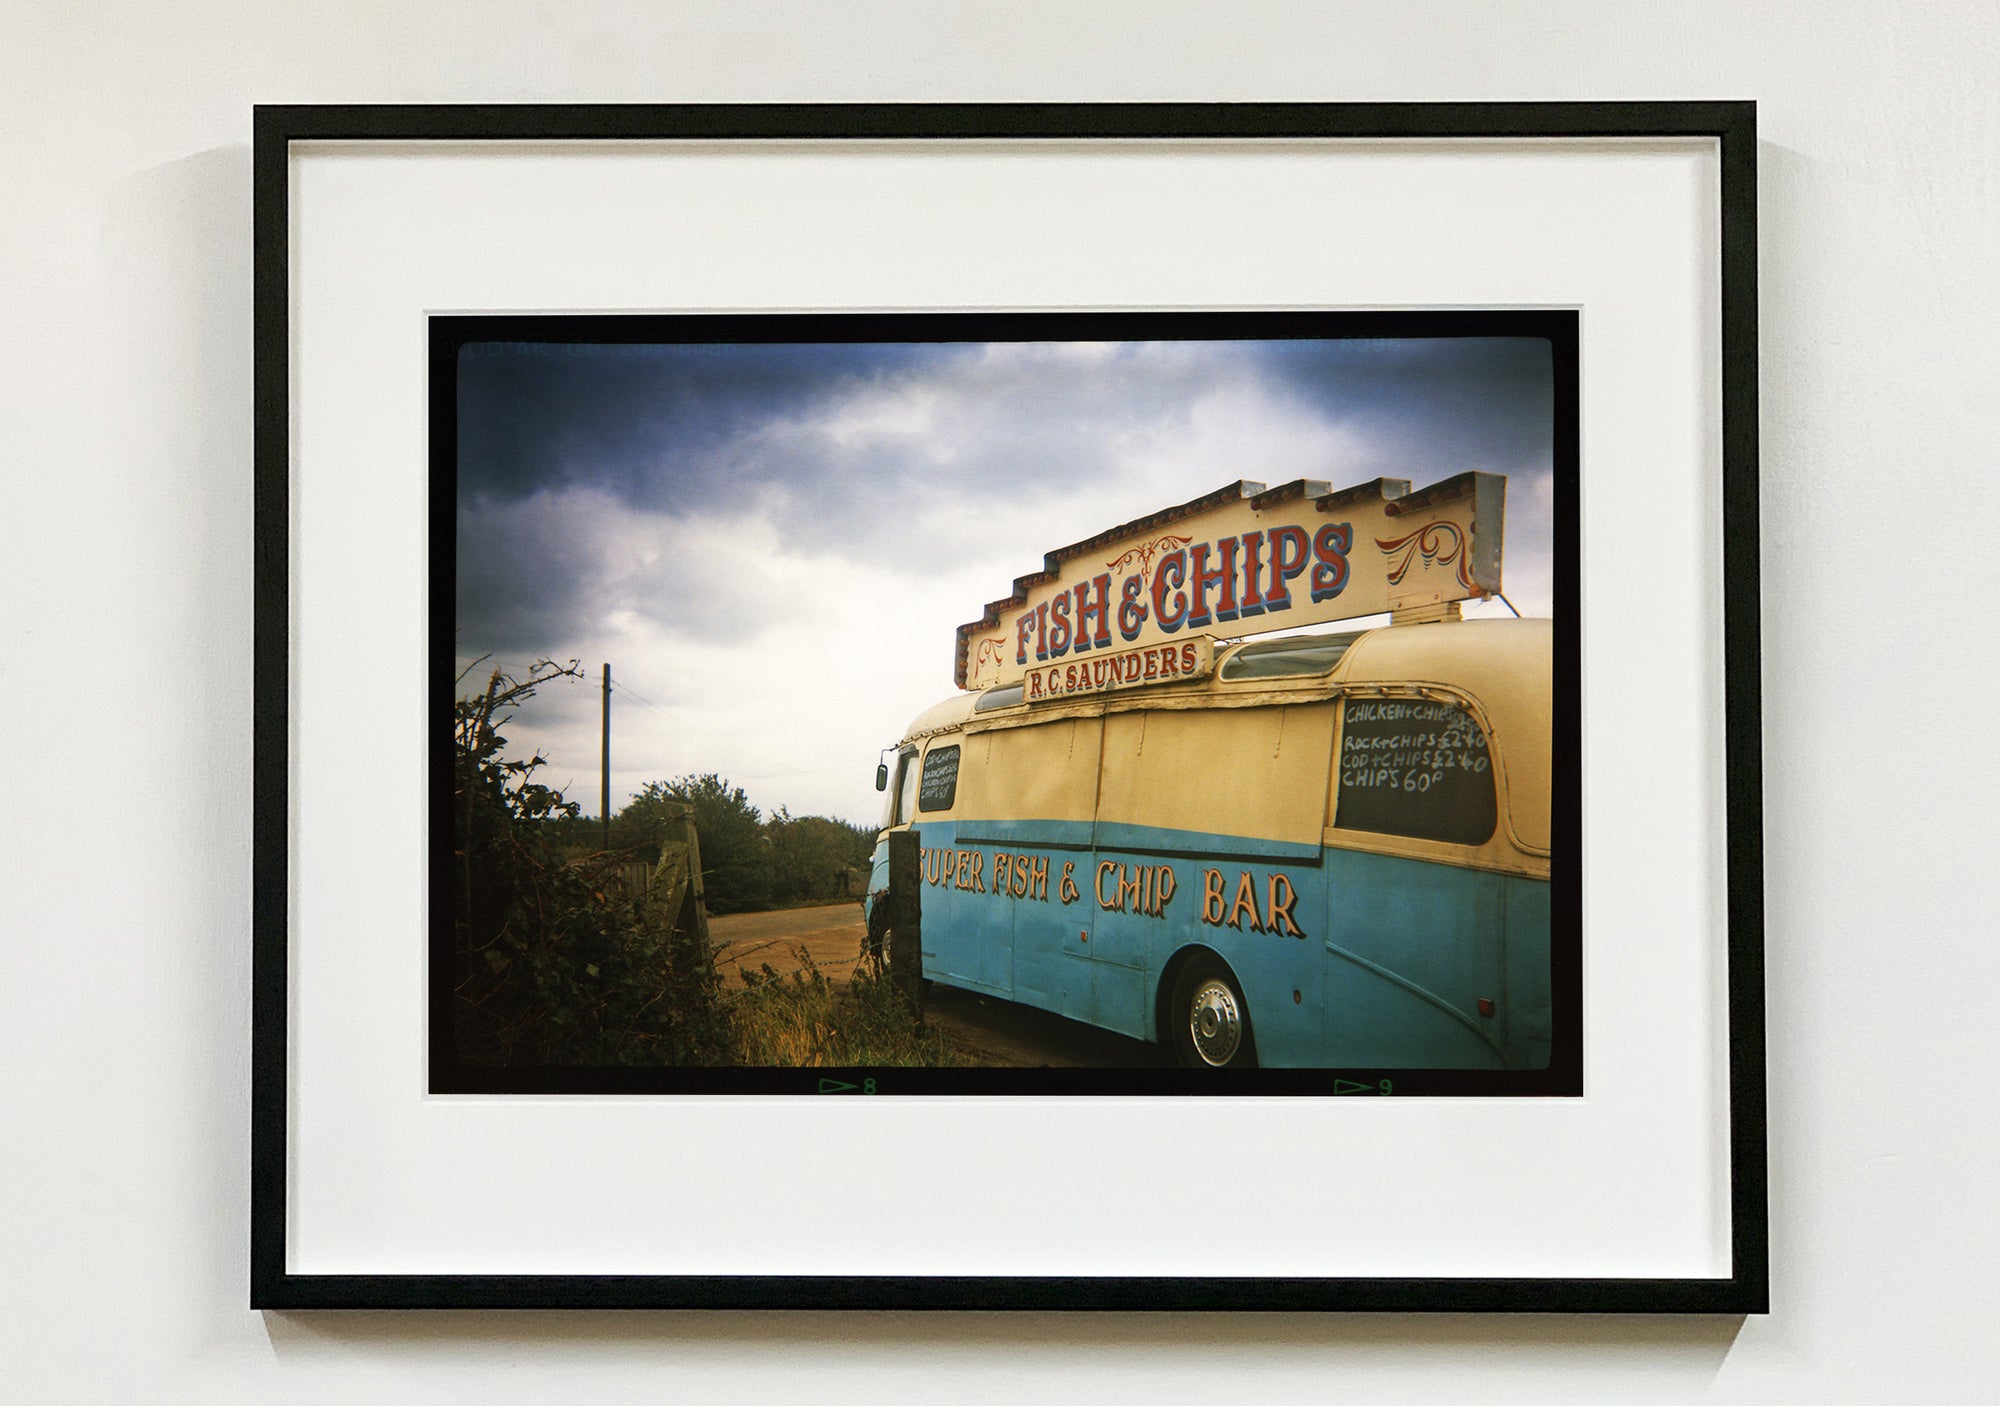 A moody Fenland sky is backdrop to a classic British Fish & Chips Van. The typography and the van itself has a fun fairground feel, contrary to the muted tones of this piece. Part of Richard Heeps series, 'A View of the Fens from the Car with Wings'.